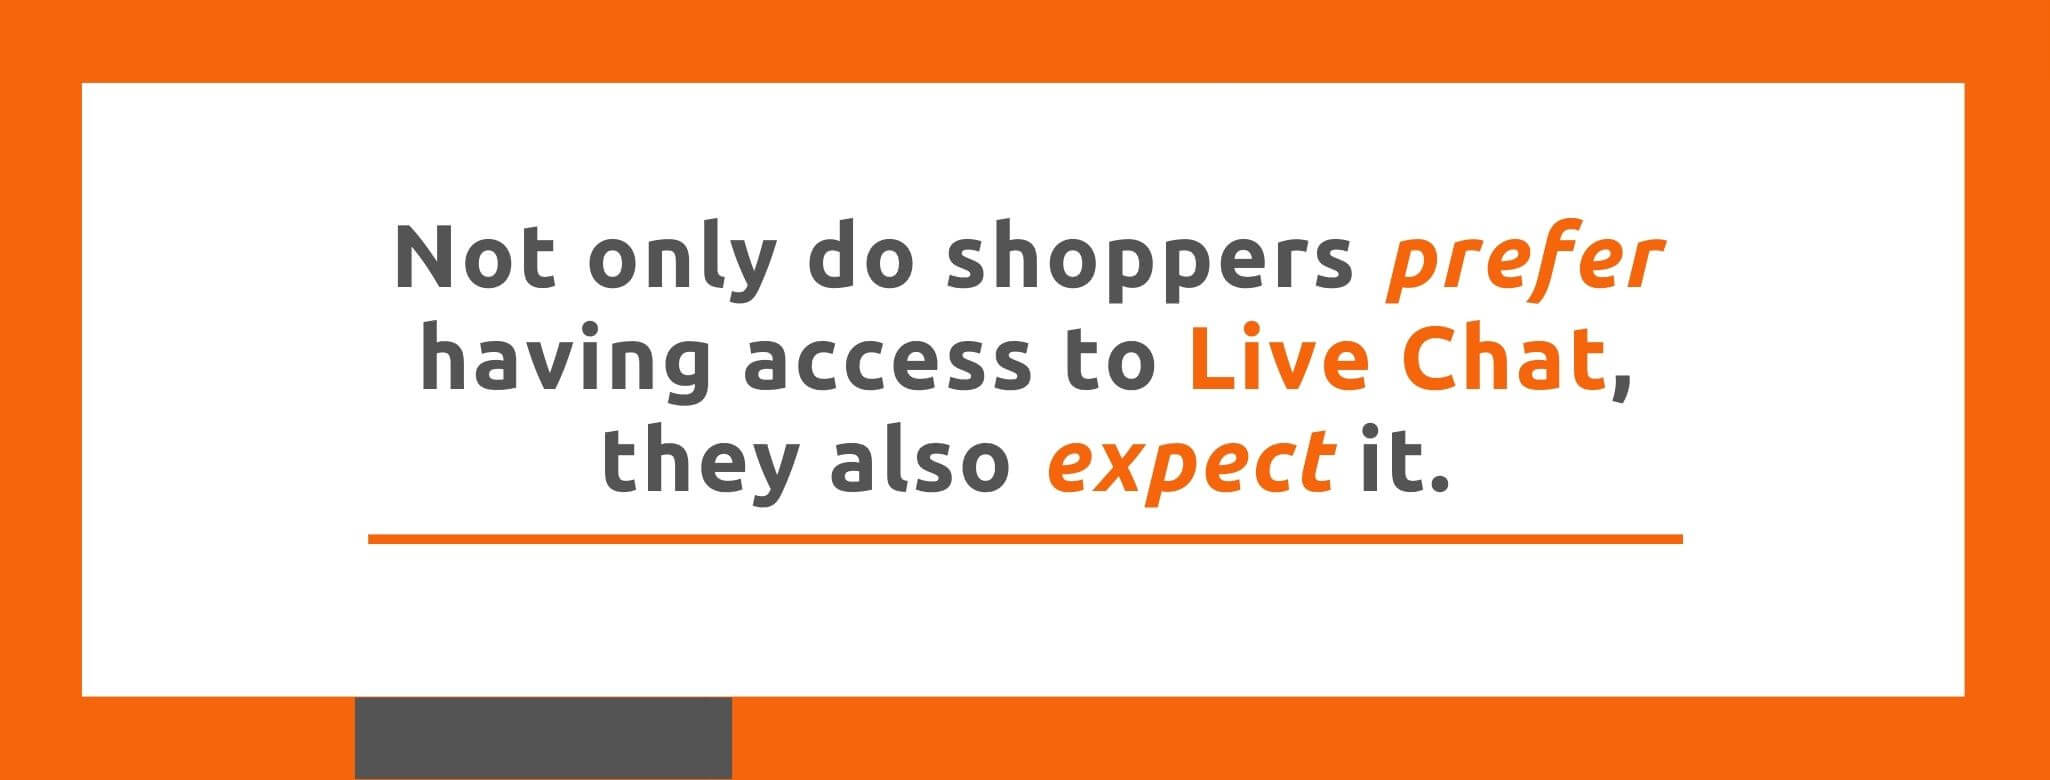 Not only do shoppers prefer having access to Live Chat, they also expect it. - 22 Live Chat Statistics - Replyco